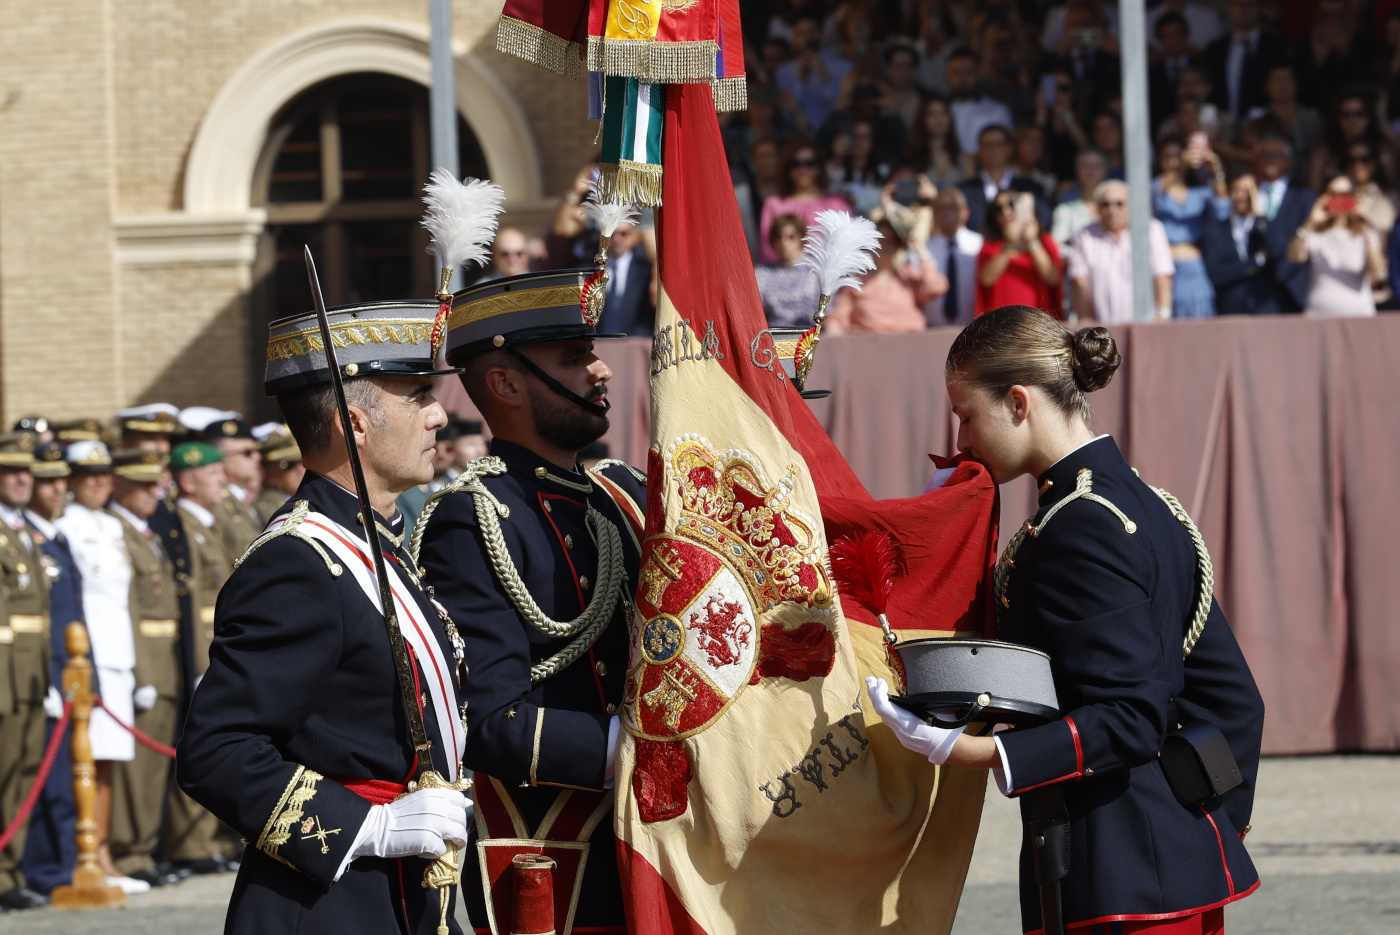 King Felipe VI of Spain, Queen Letizia of Spain, Princess Sofia and  Princess Leonor at the Congress during the Kings first speech to make his  proclamation as King of Spain to the